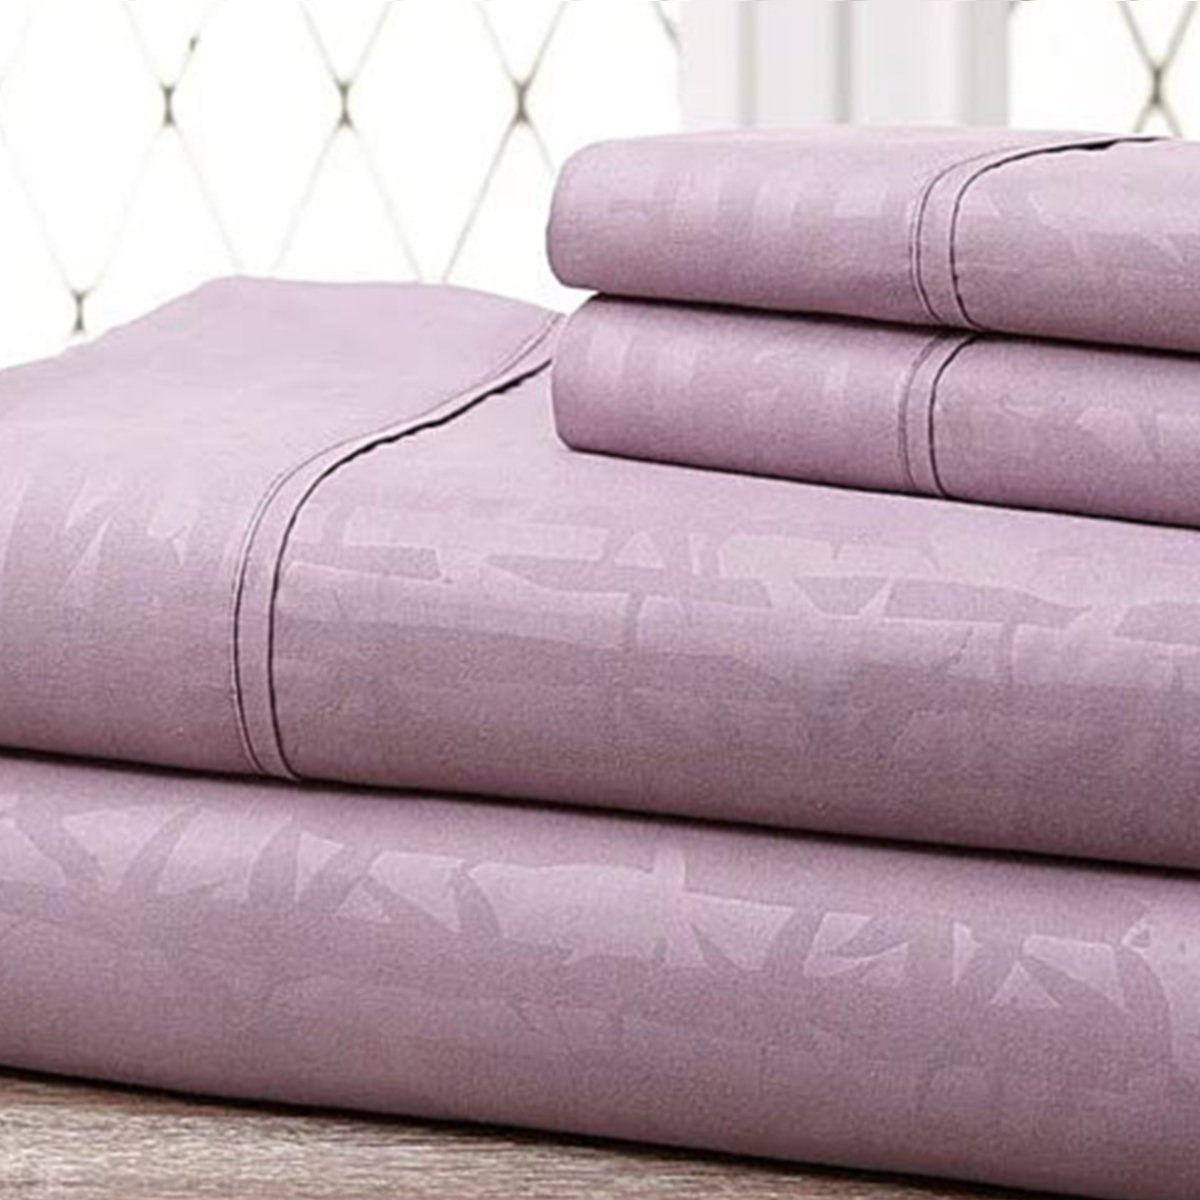 Hny-4pc-eb-lil-f Super-soft 1600 Series Bamboo Embossed Bed Sheet, Lilac - Full, 4 Piece